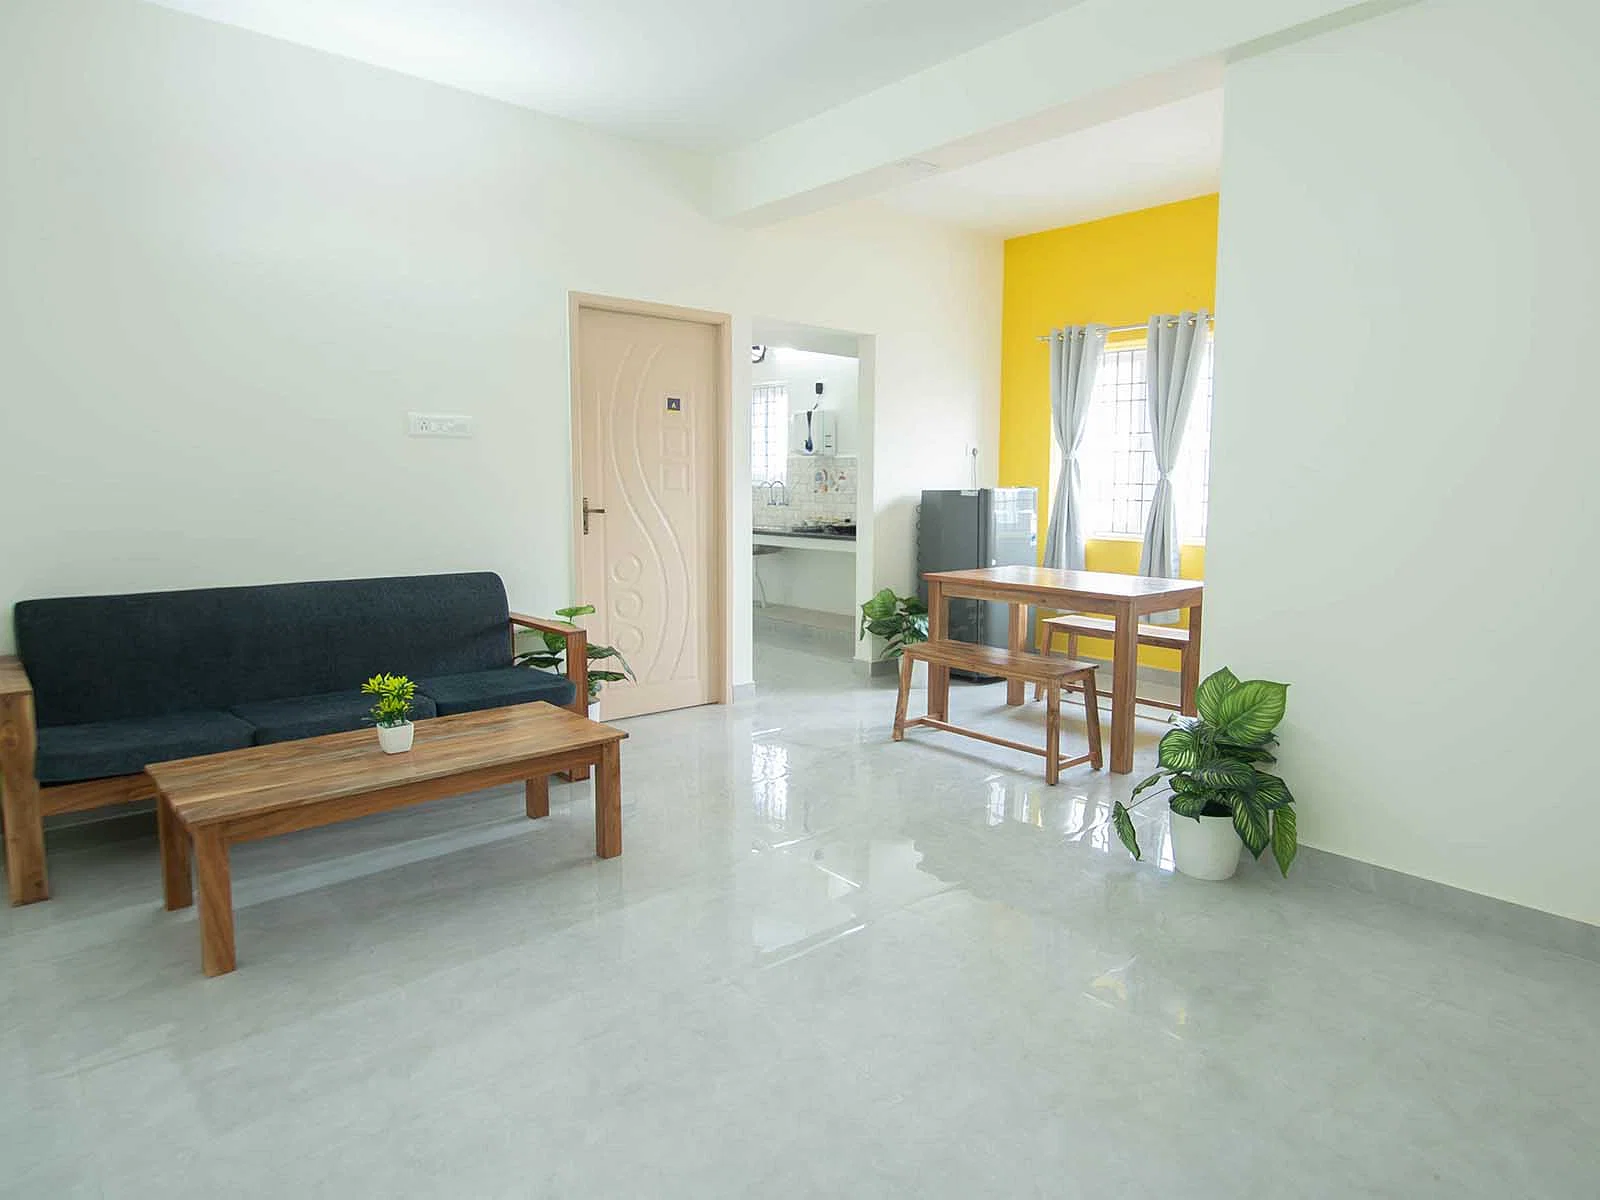 budget-friendly PGs and hostels for couple with single rooms with daily hopusekeeping-Zolo Nexus